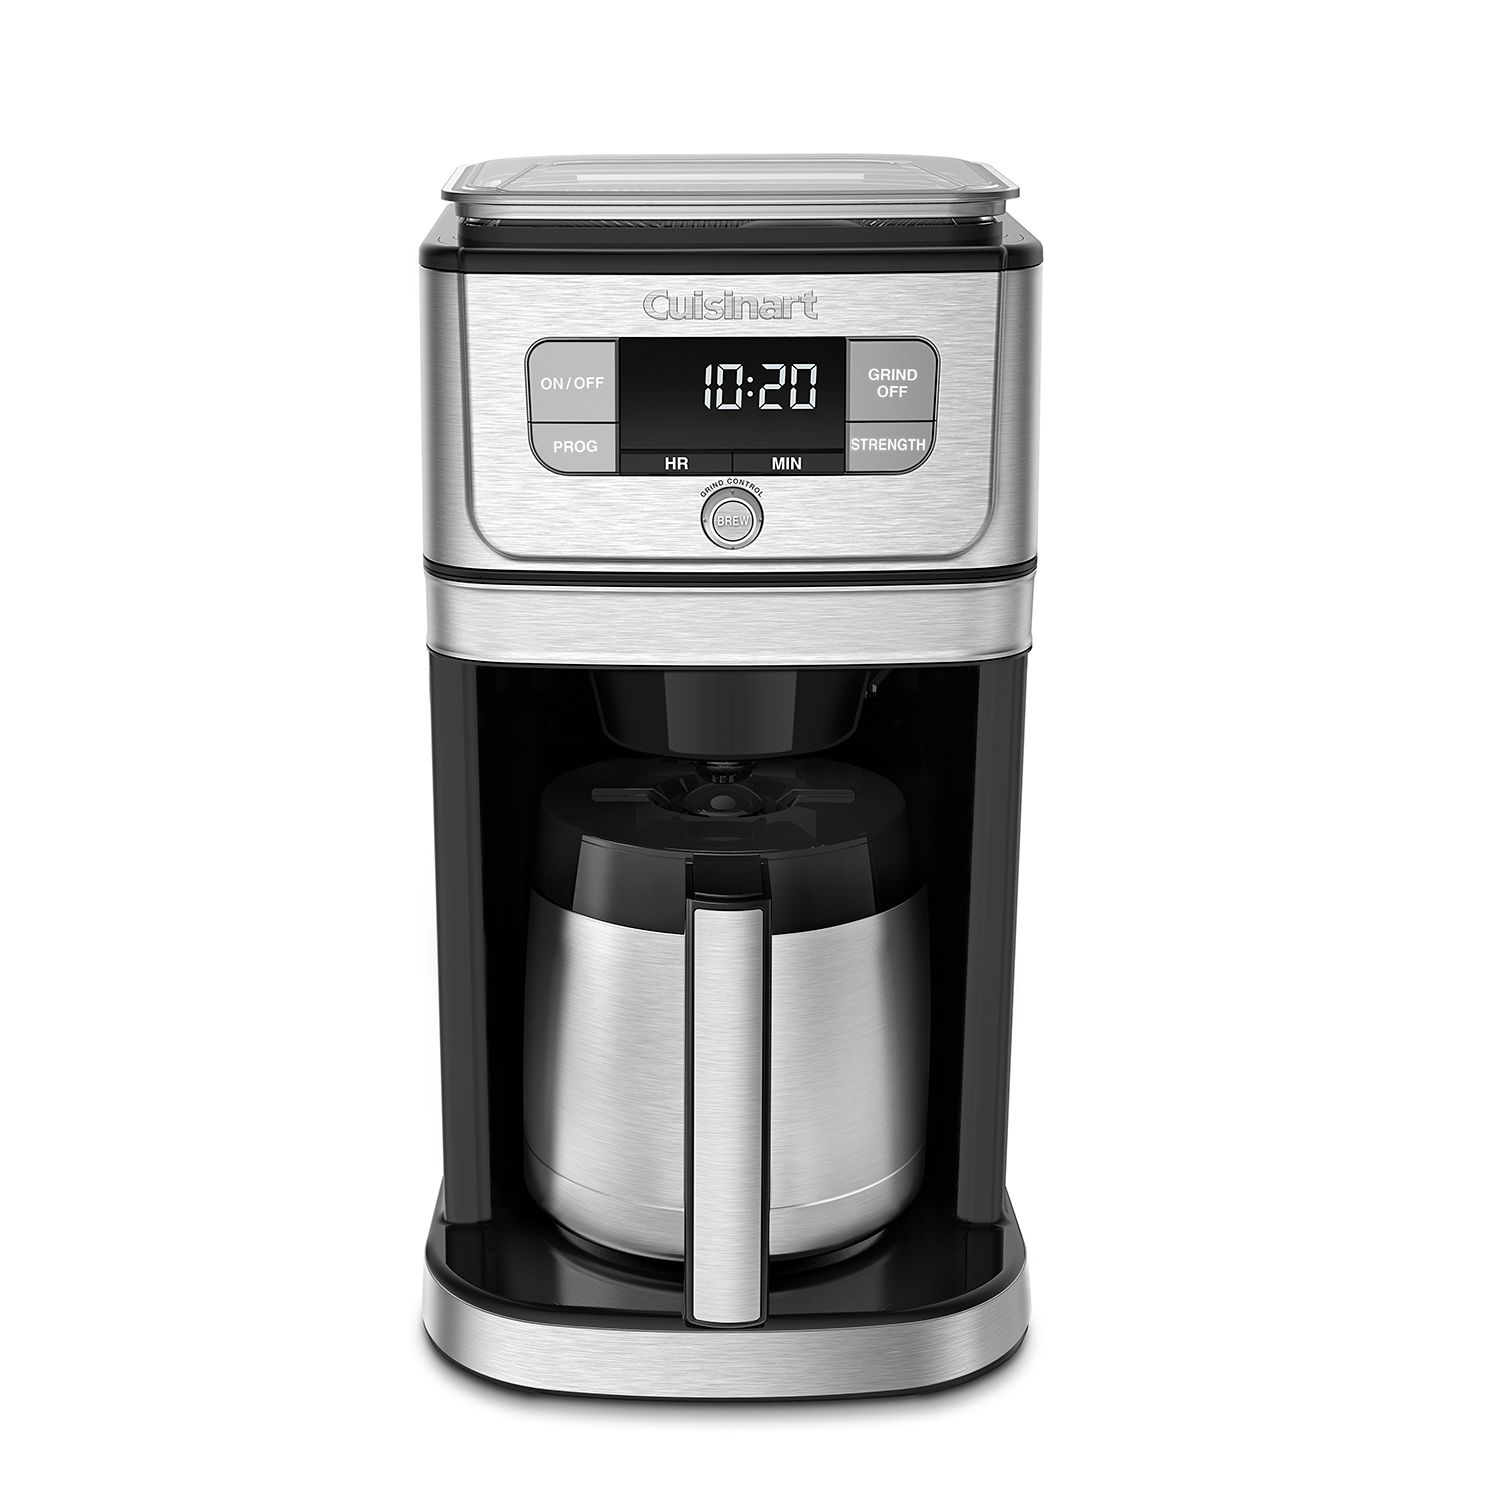 Fast, Fresh, and Flavorful Coffee with the Kenmore Grind and Brew